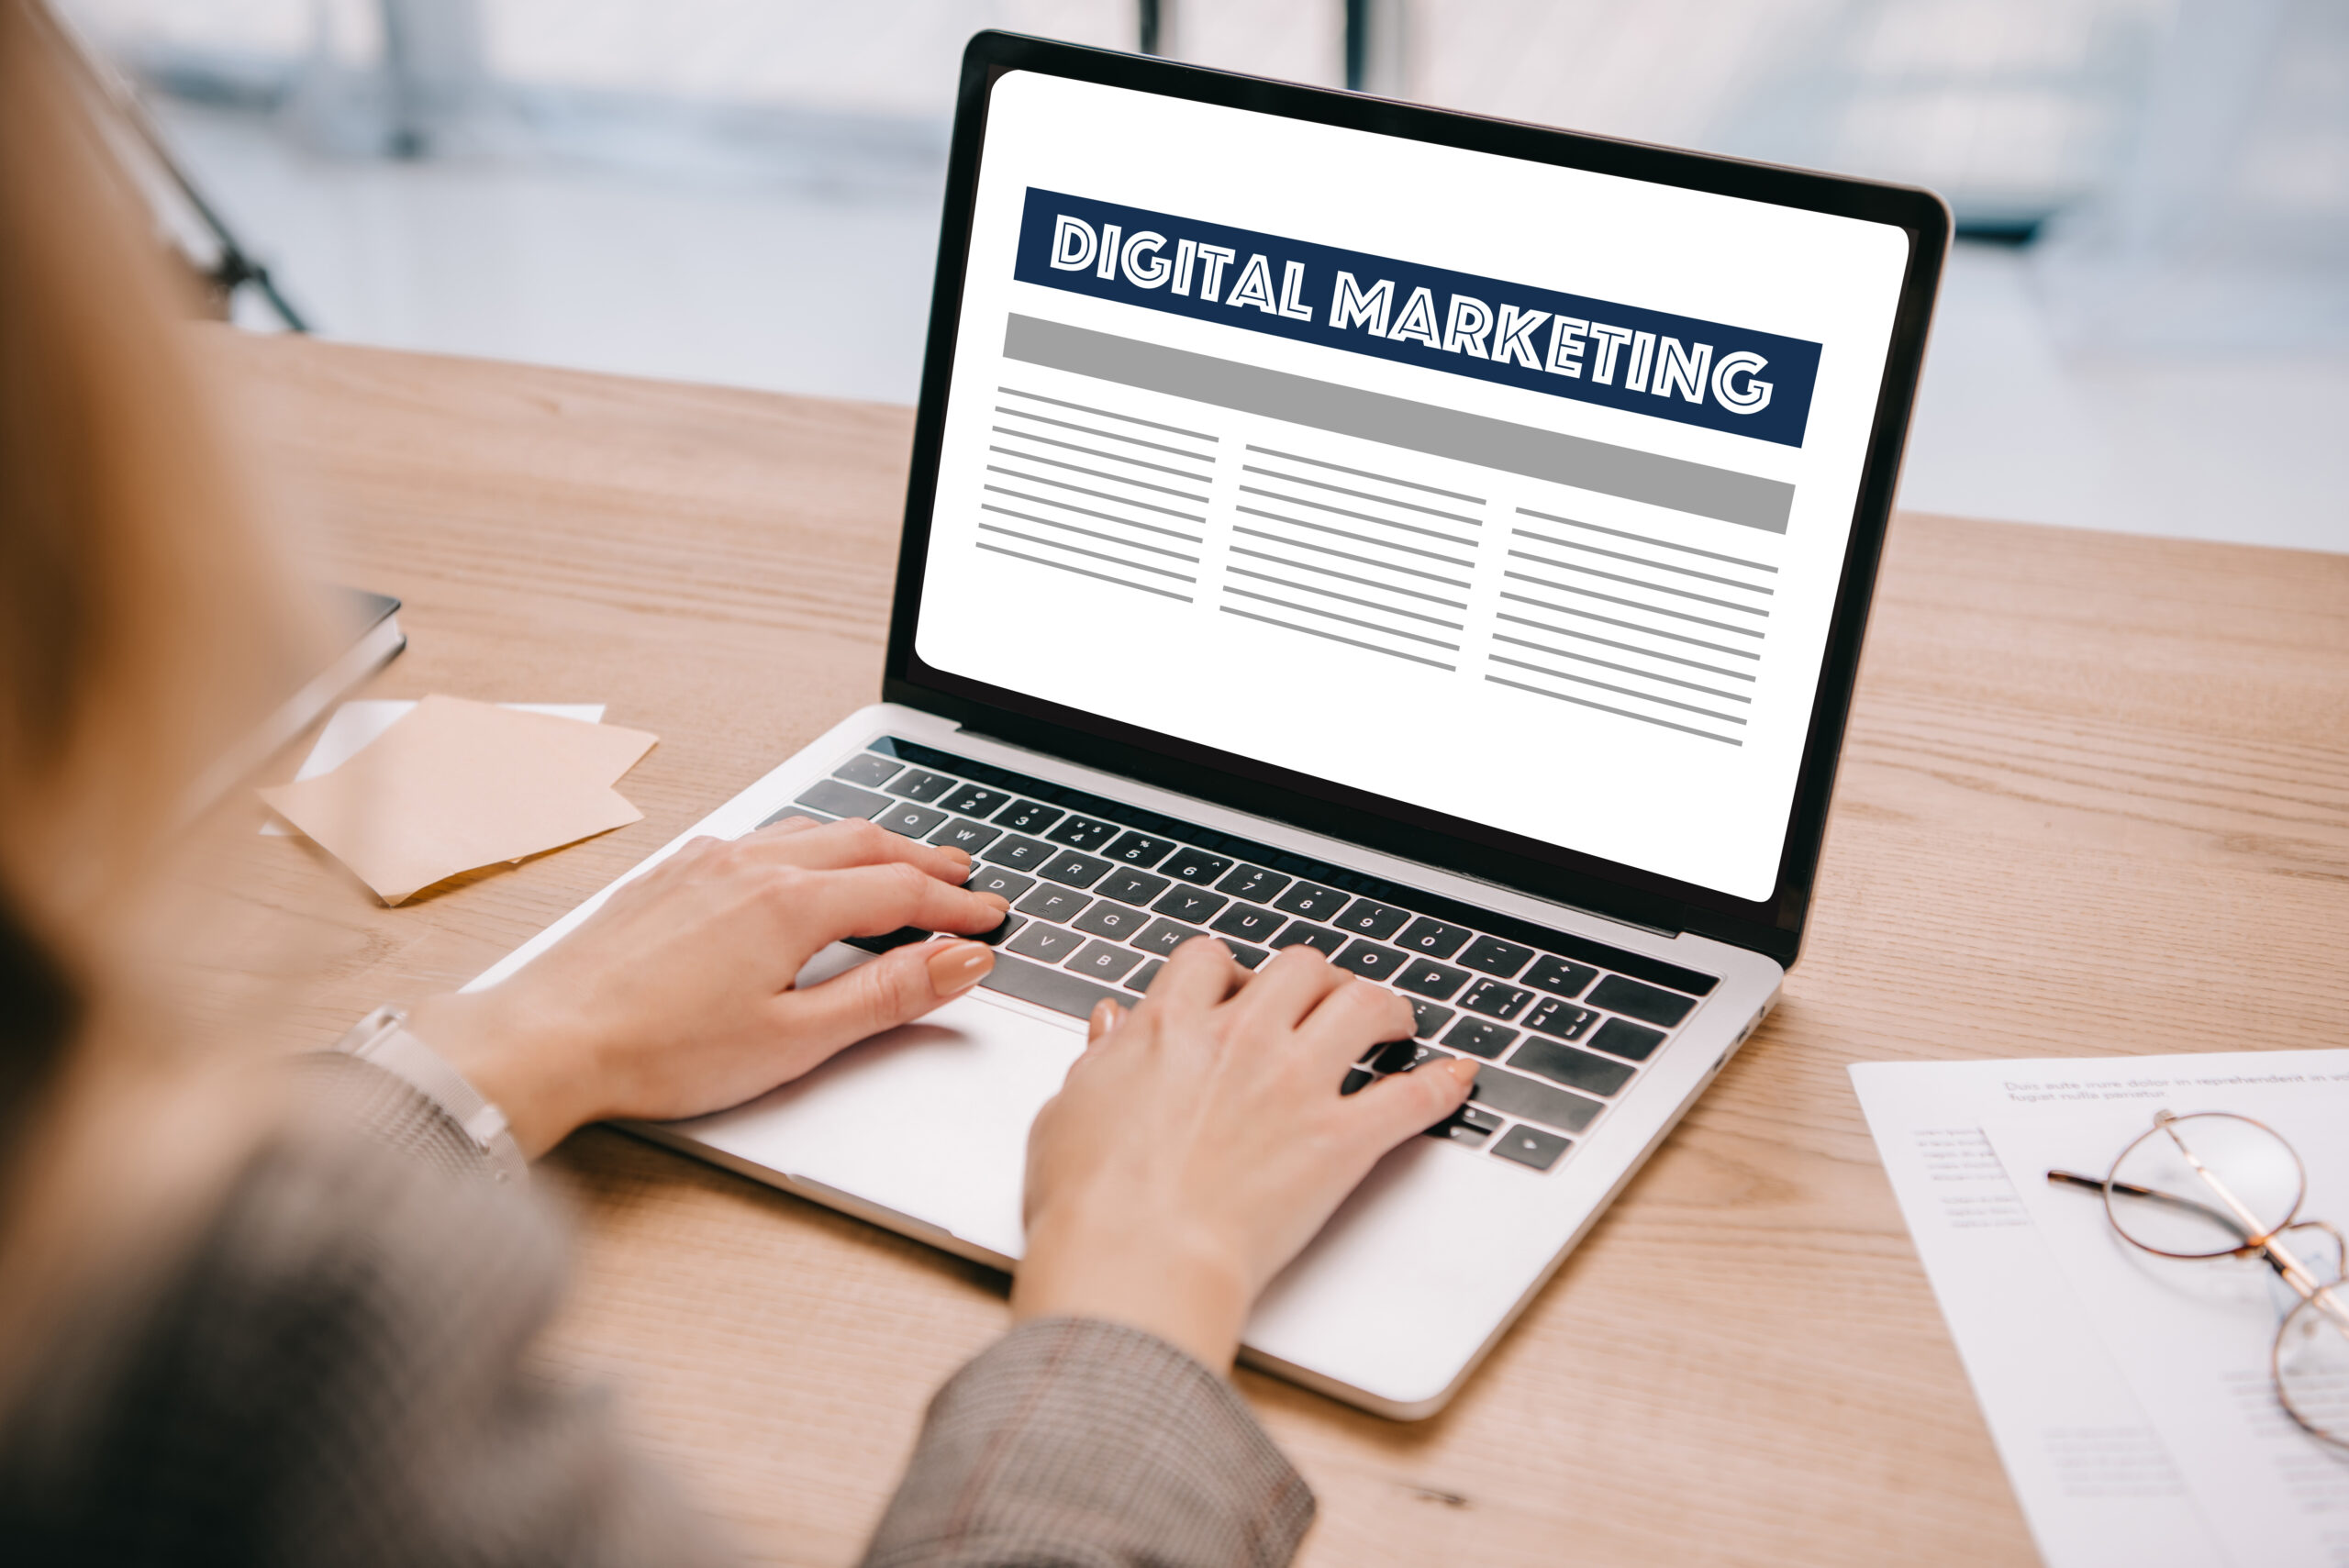 How to choose the best Digital Marketing Agency?